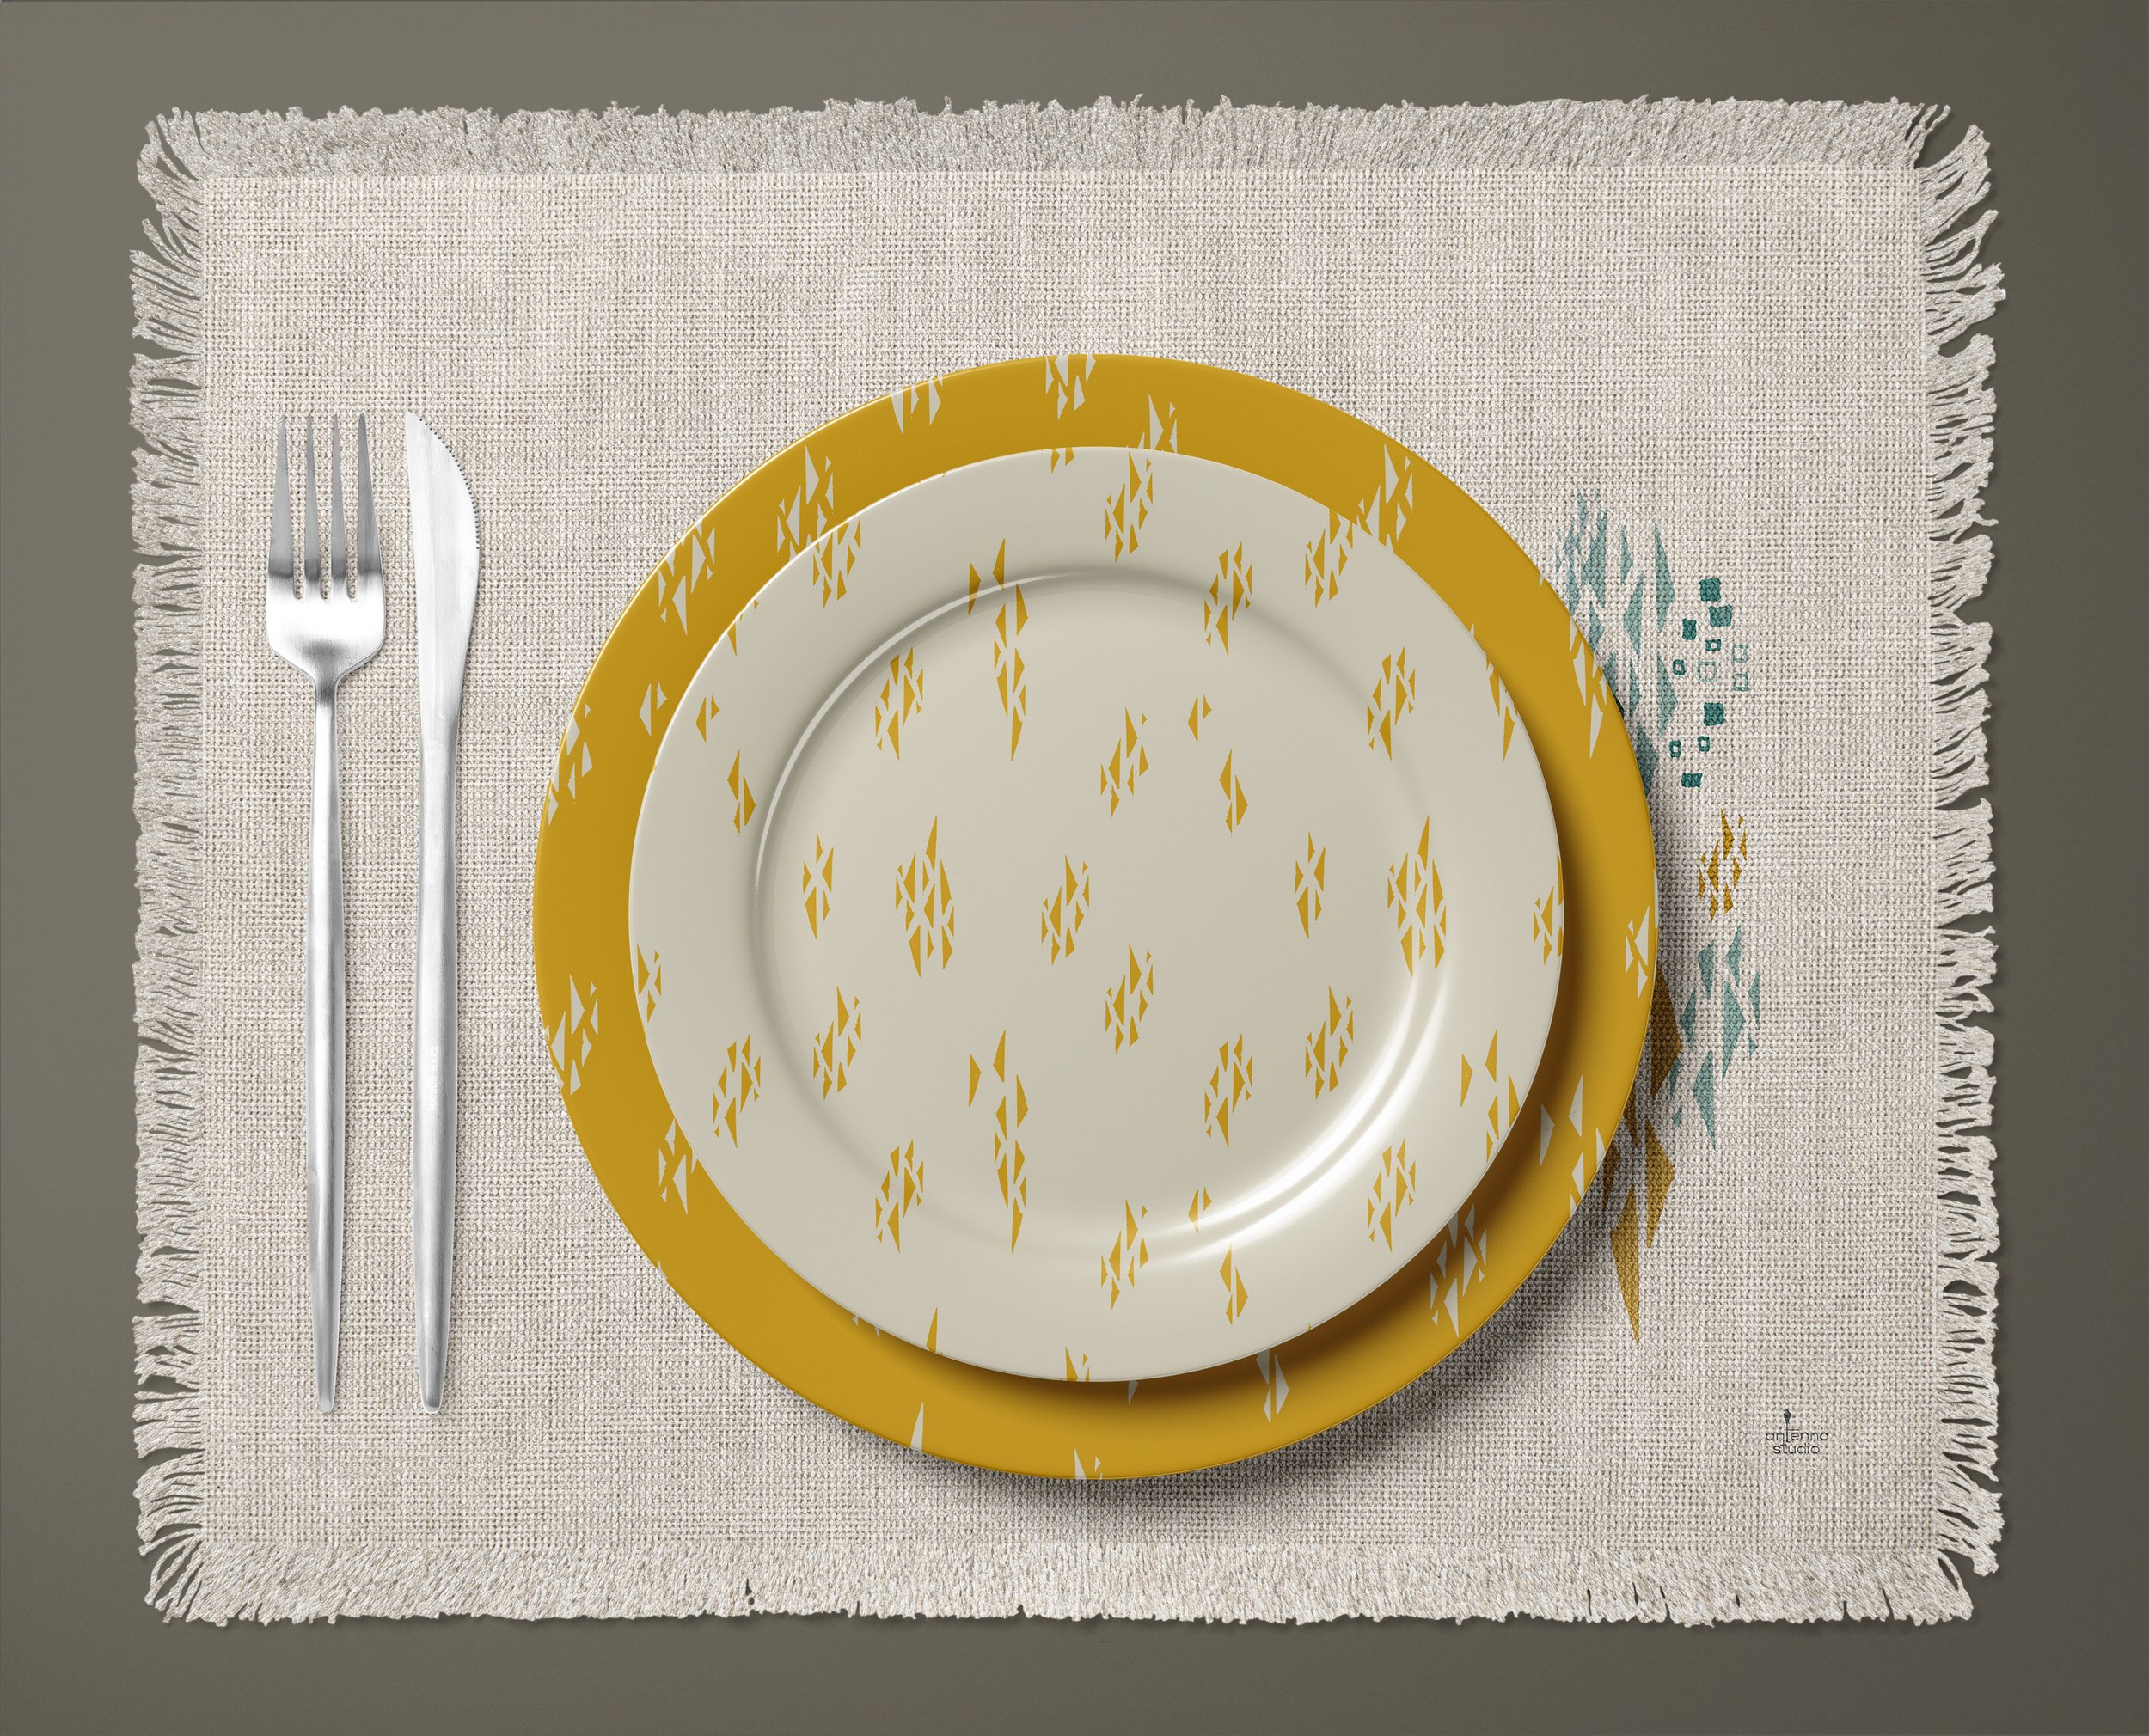 Fringed Placemat and Plates Mockup by Creatsy.jpg